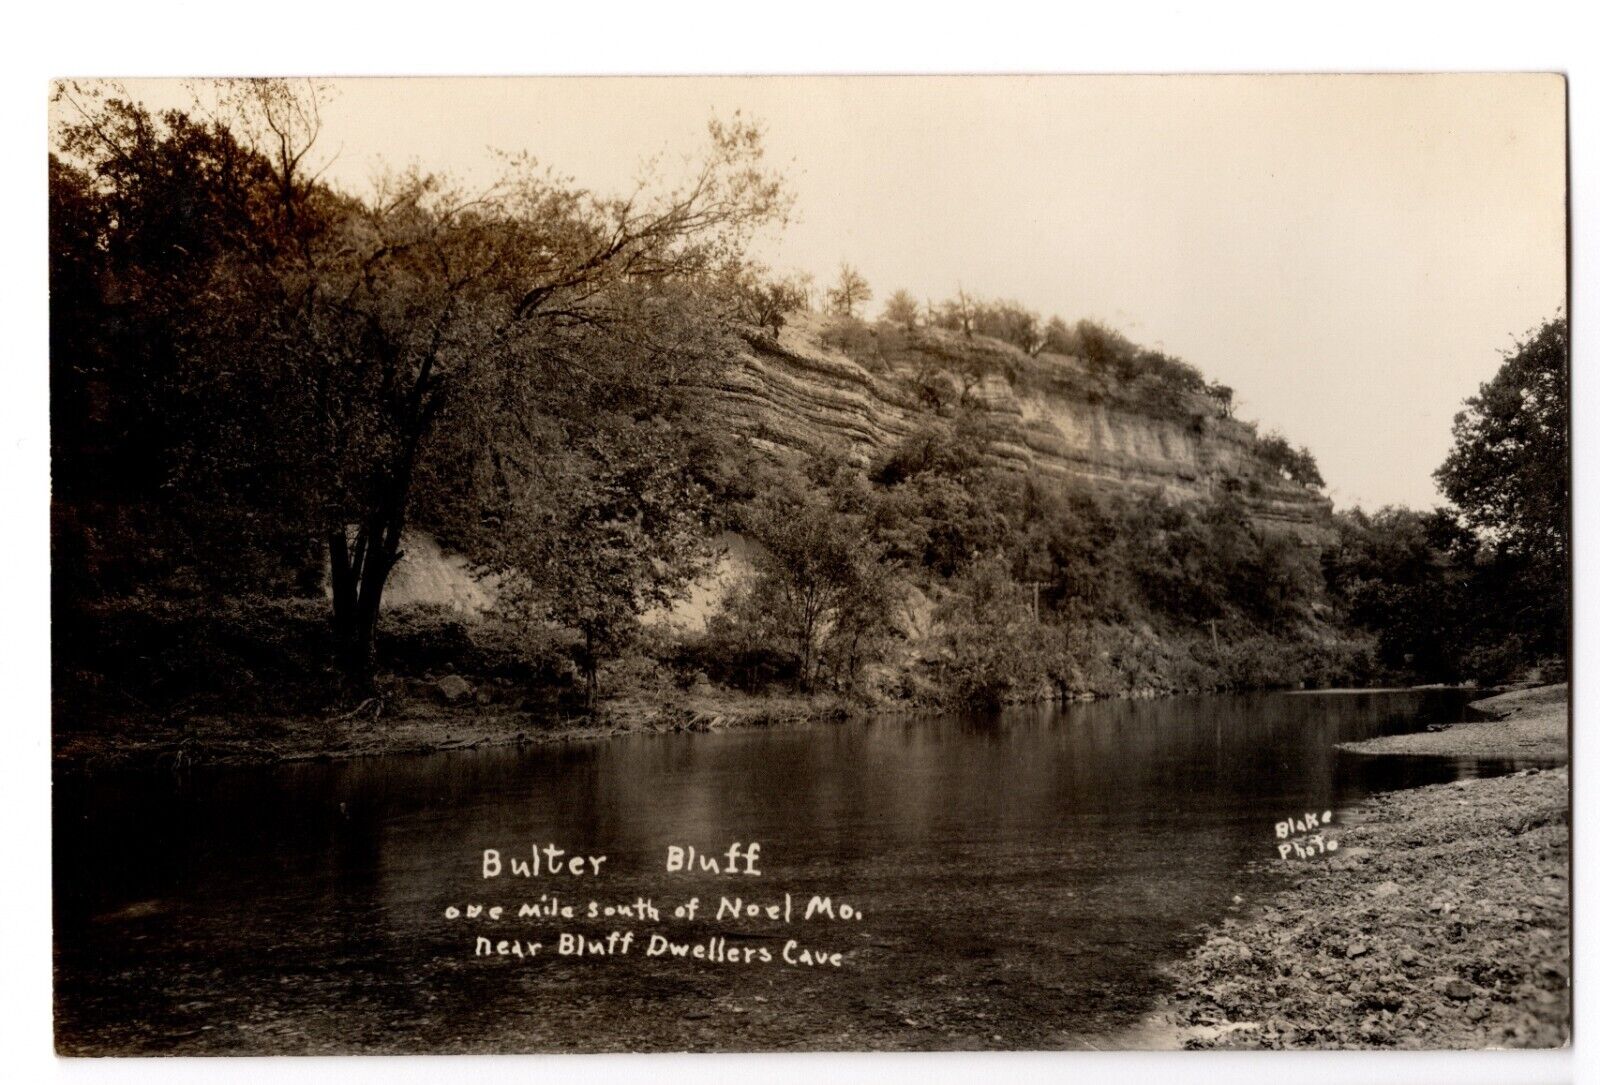 RPPC Real Photo Postcard - Butler Bluff, Noel, MO, misspelled as Bulter